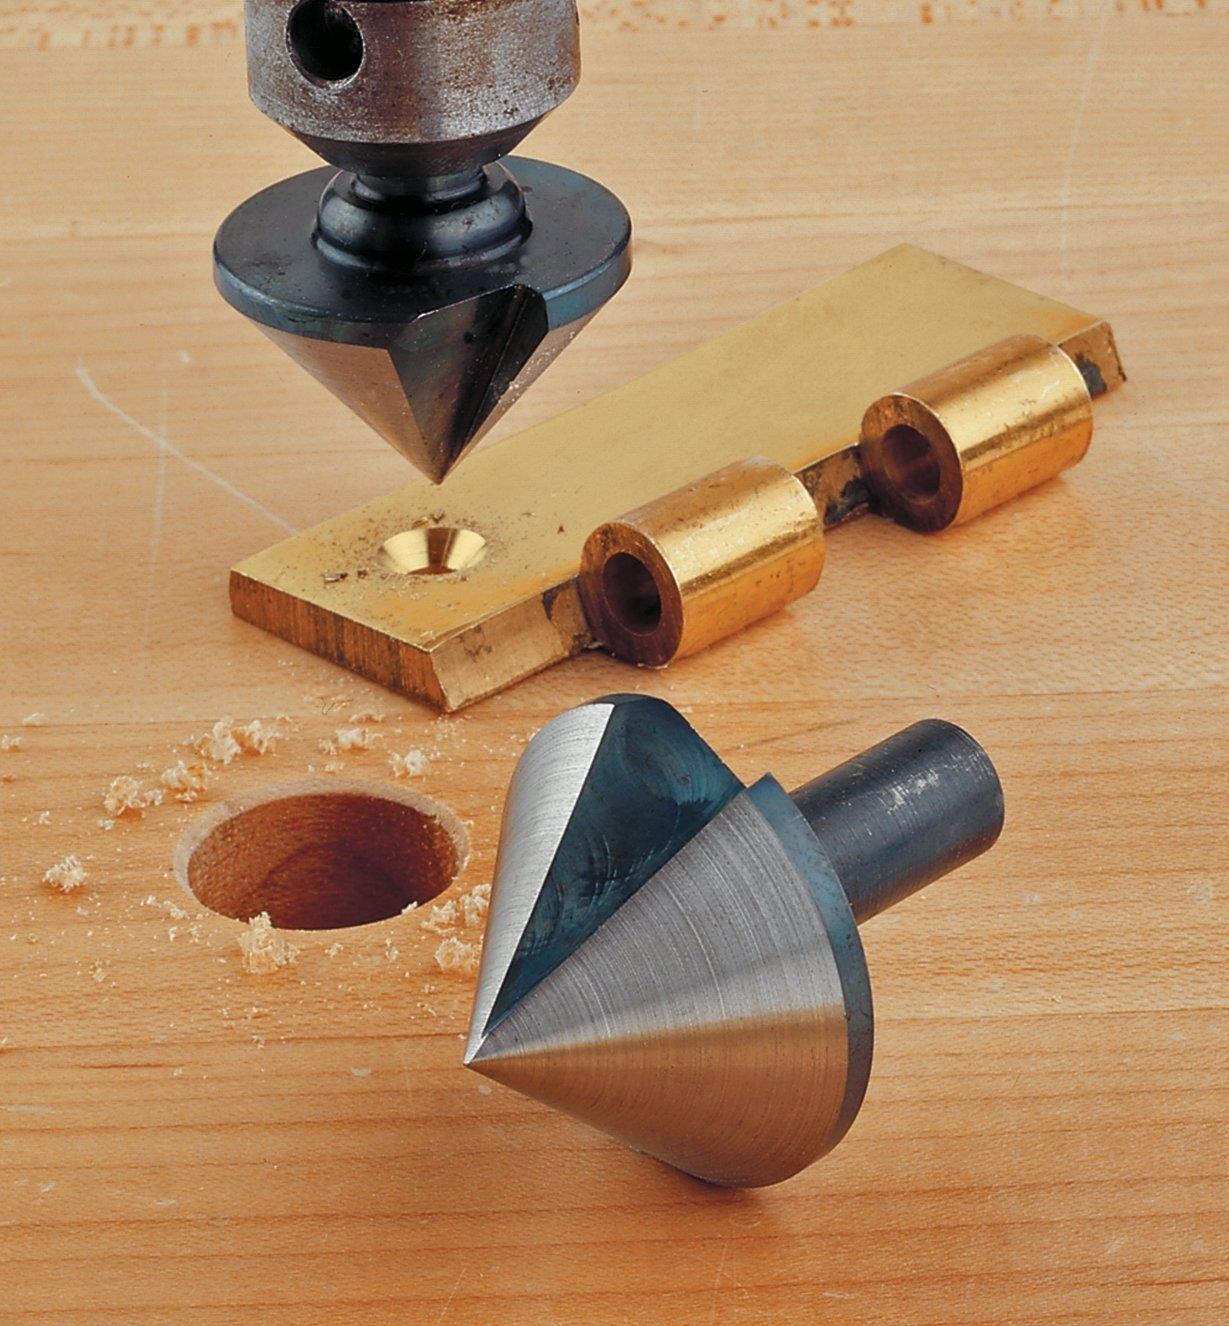 An 82° countersink in a drill press being used to chamfer a hole